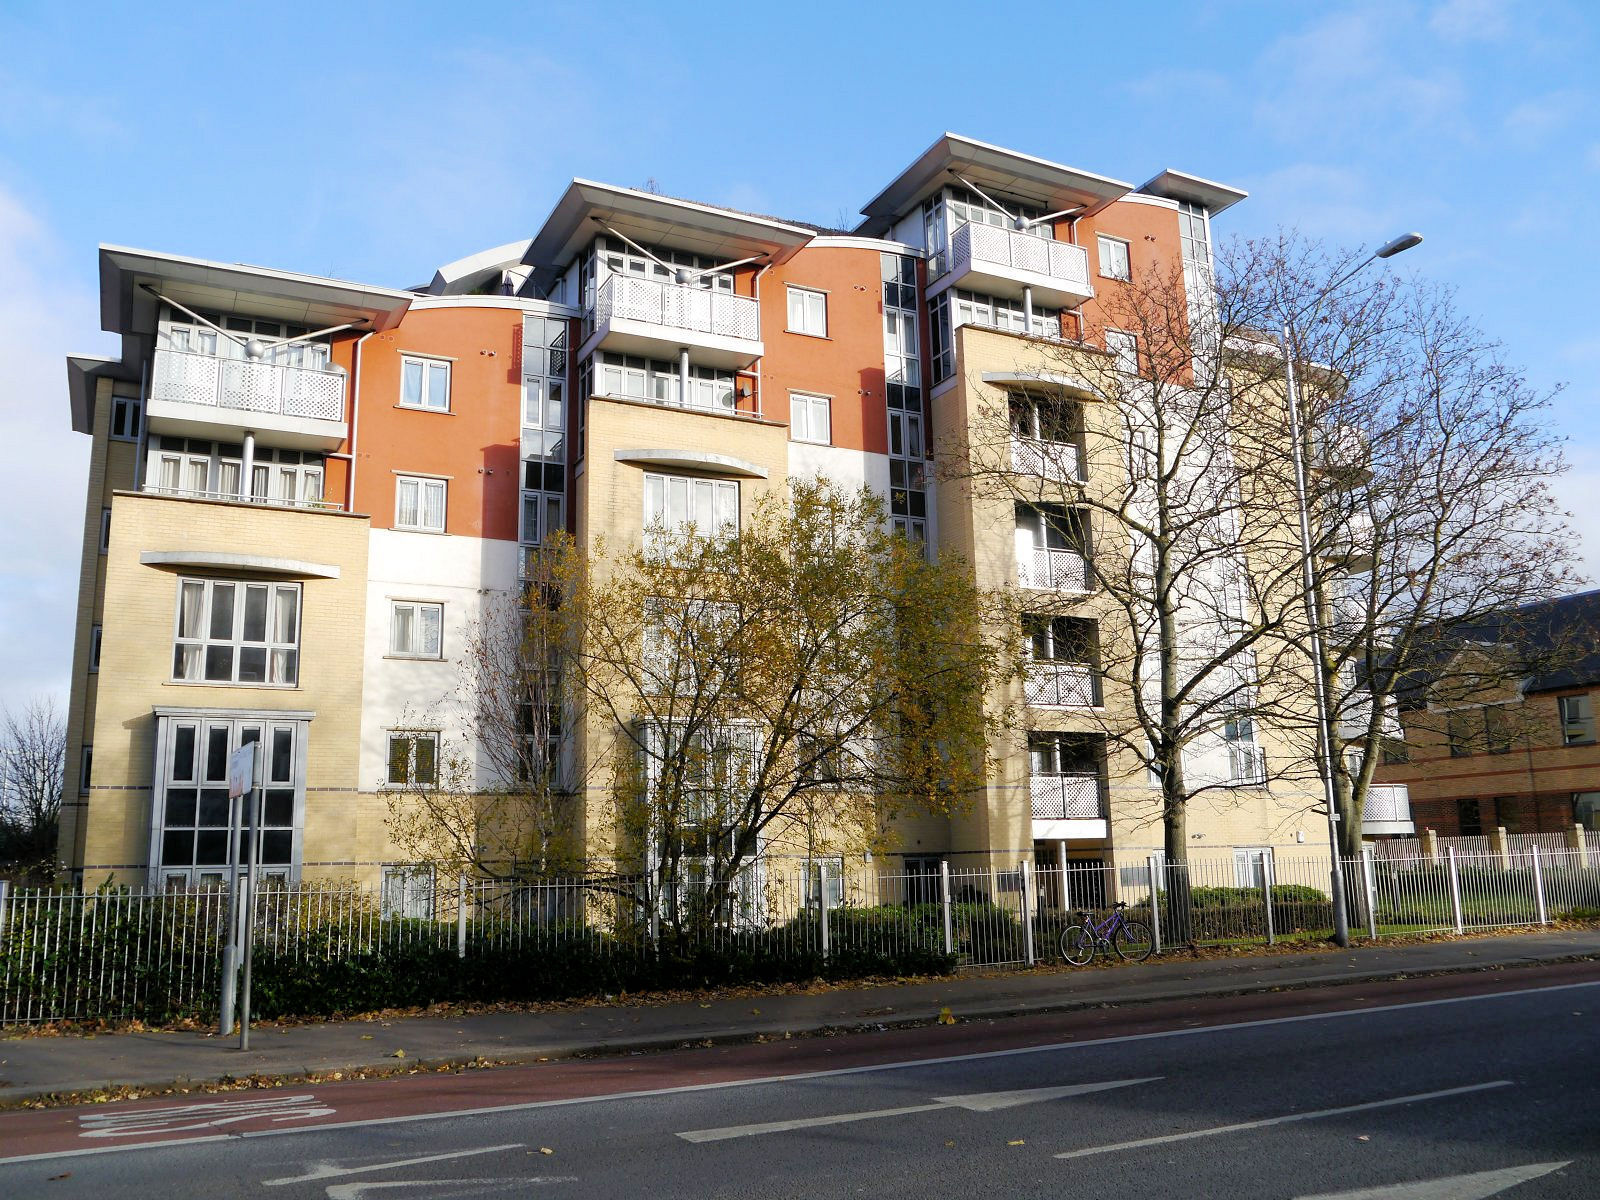 2 bedroom  flat for sale The Pinnacle, King's Road, Reading, RG1, main image